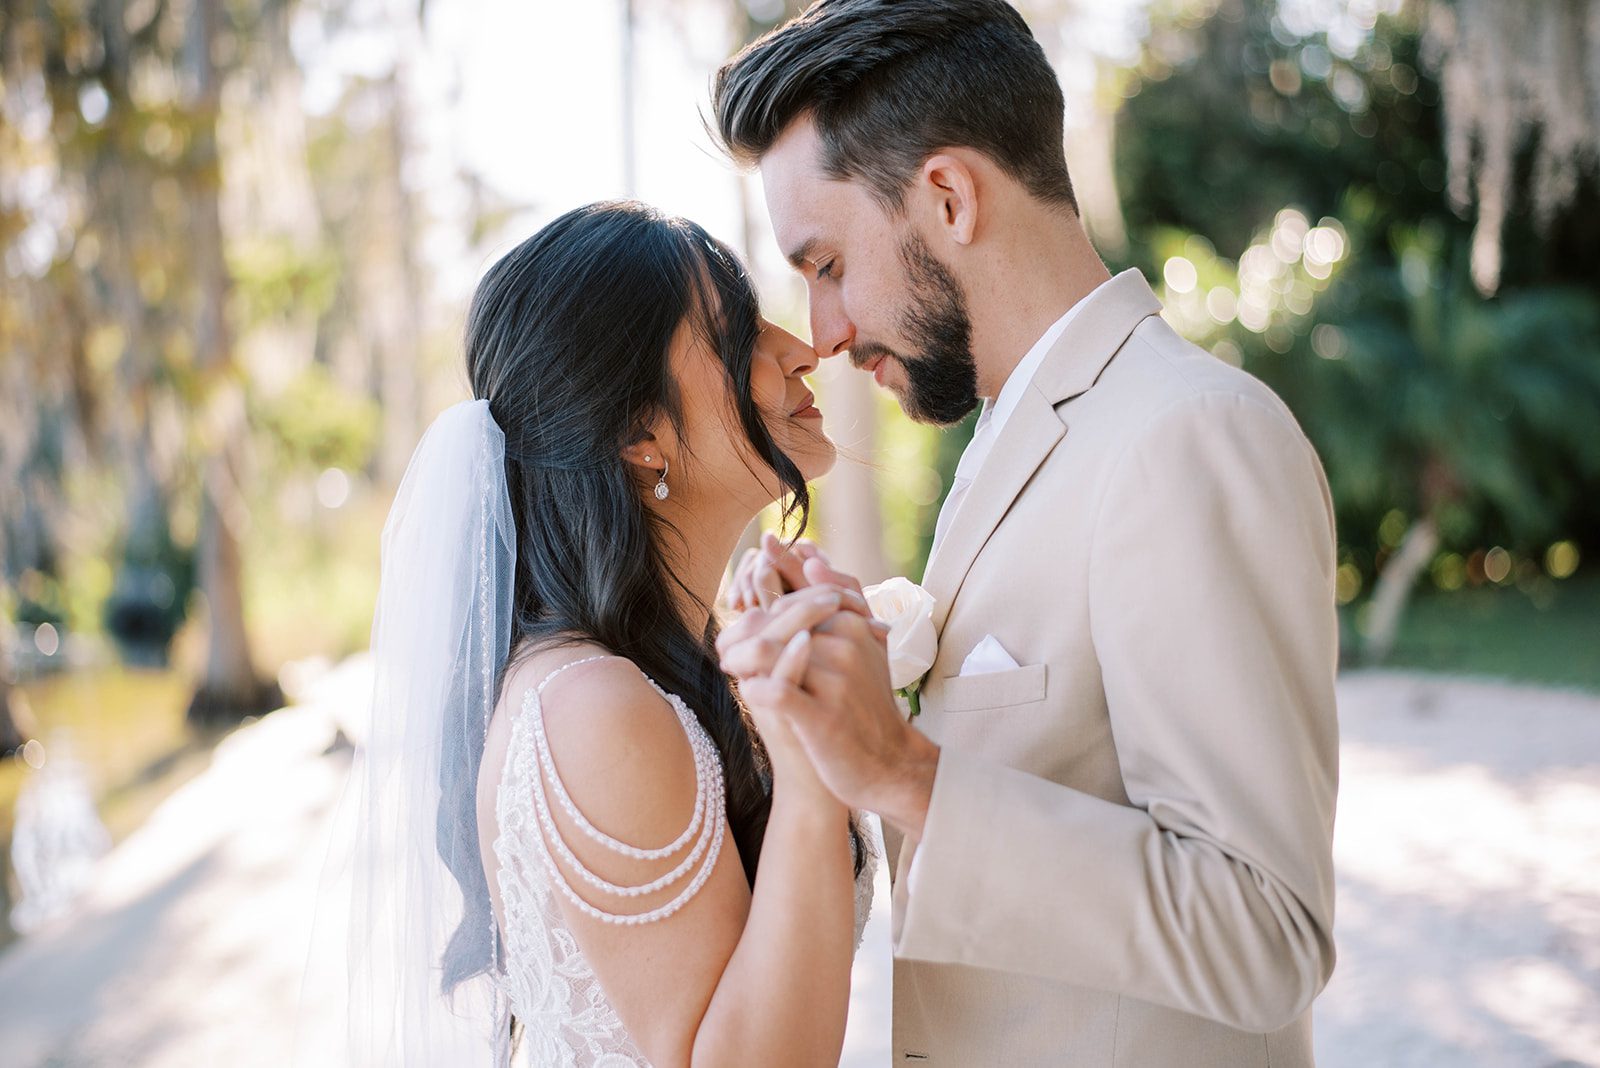 Wedding Vendors Search Etiquette, bride in a stunning 20s era inspired wedding gown holds hands with her groom who is wearing a tan suit as their noses touch and they gently smile at one another in Tampa Wedding